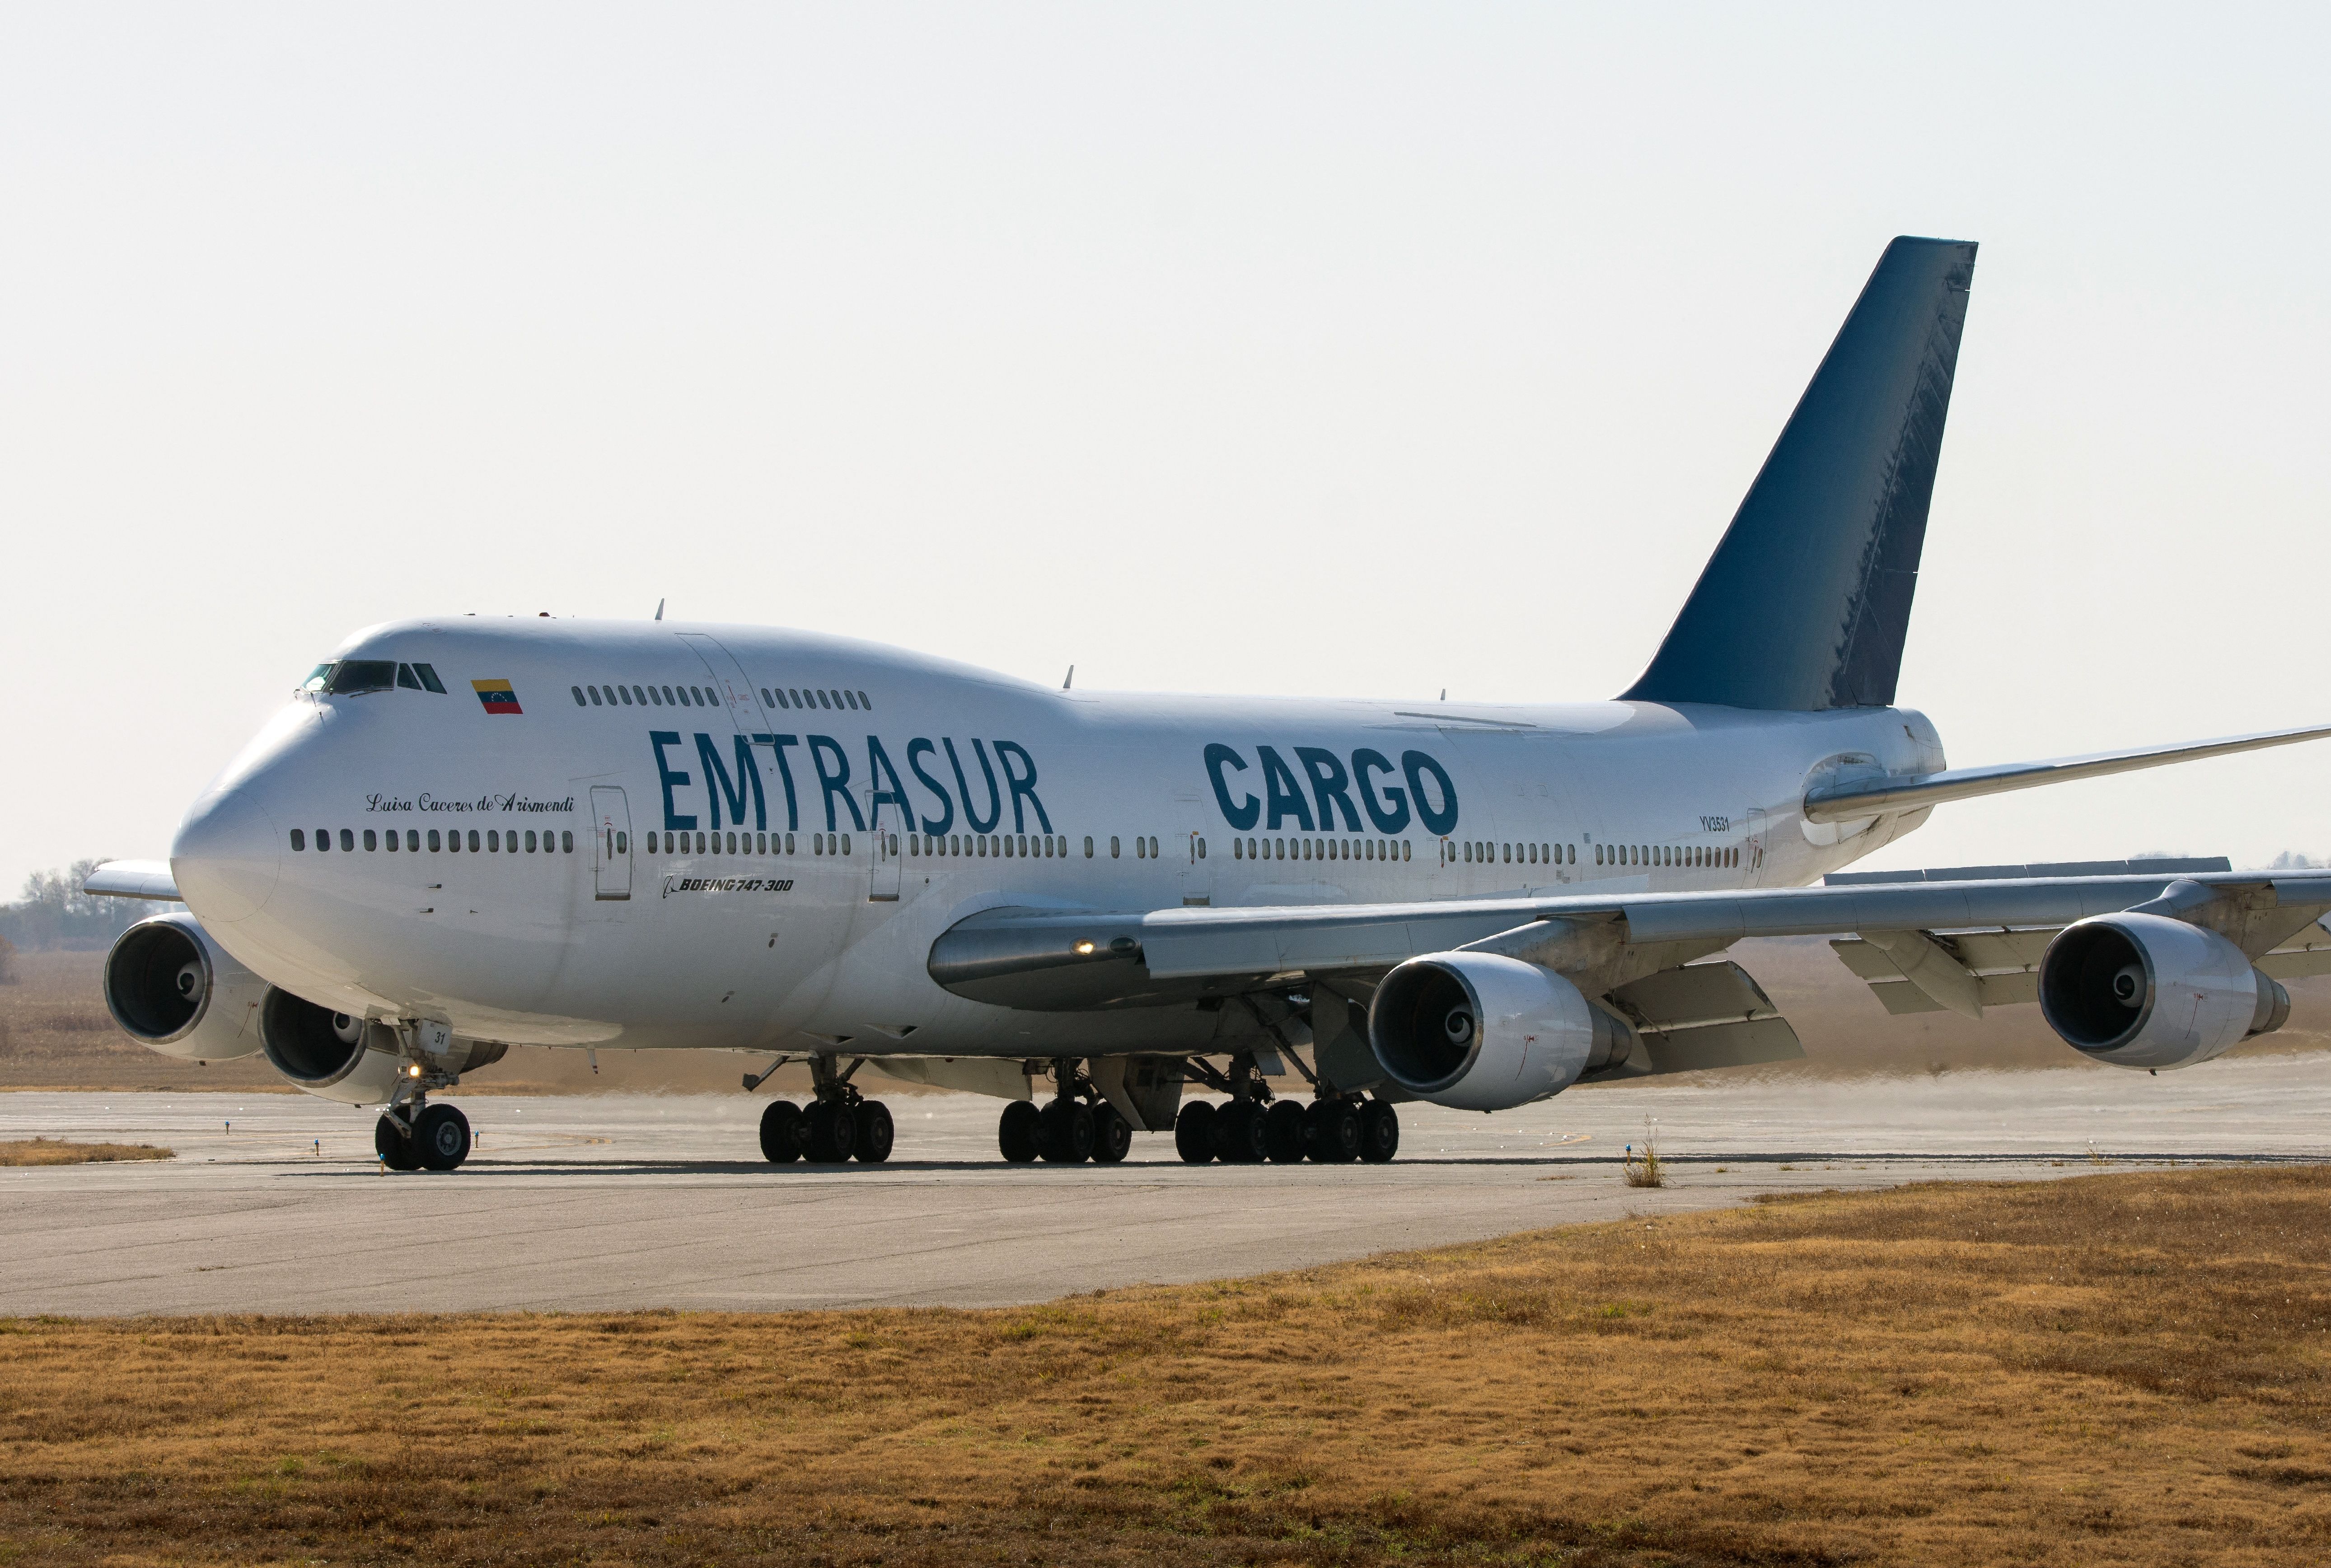 View of the Boeing 747-300 registrered number YV3531 of Venezuelan Emtrasur cargo airline at the international airport in Cordoba, Argentina